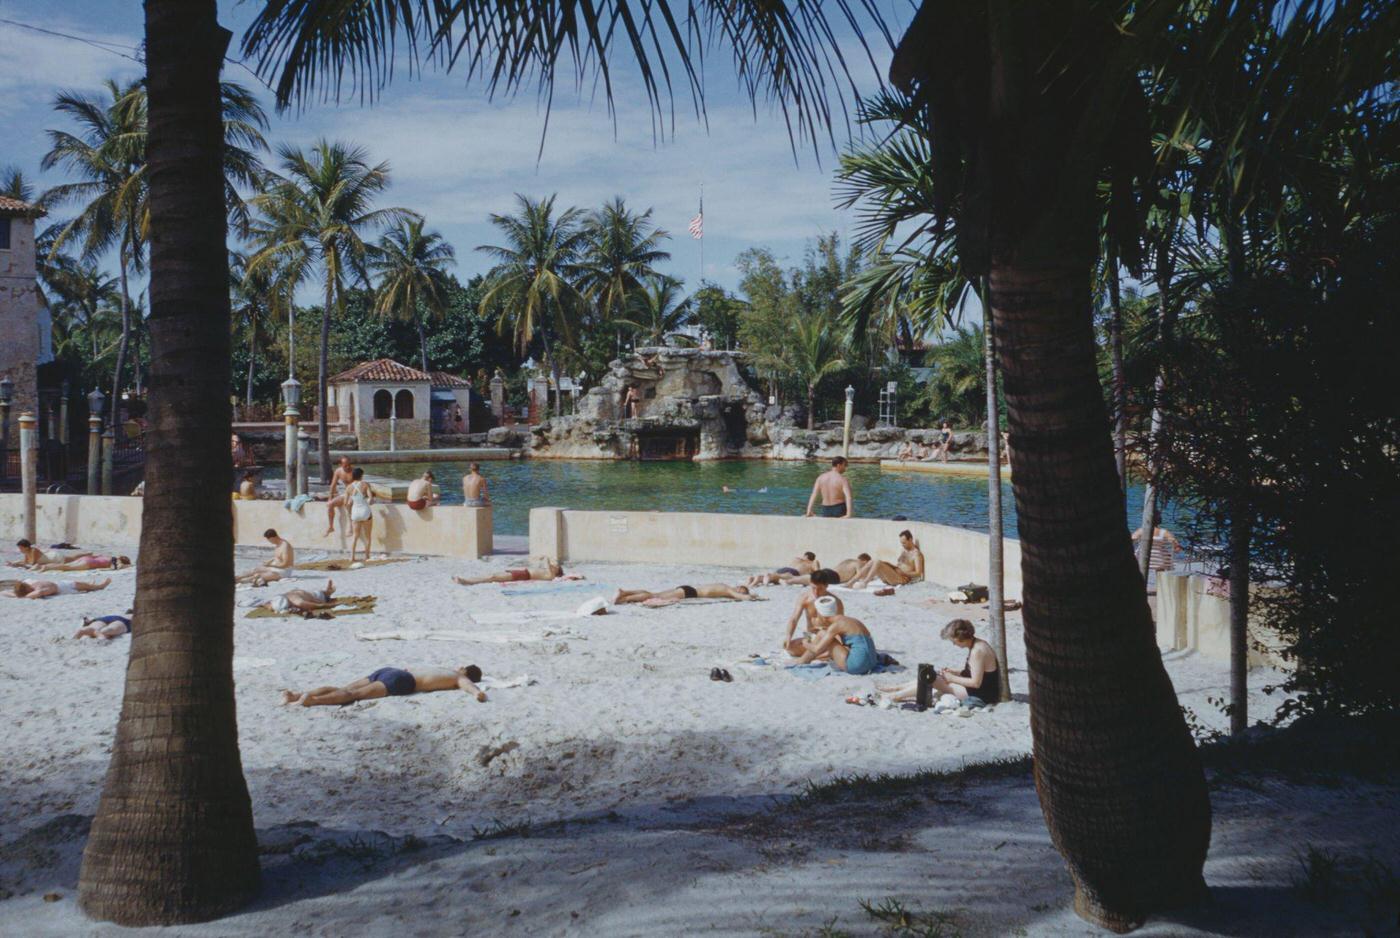 The Venetian Pool, a public swimming pool in Coral Gables, Florida, 1960